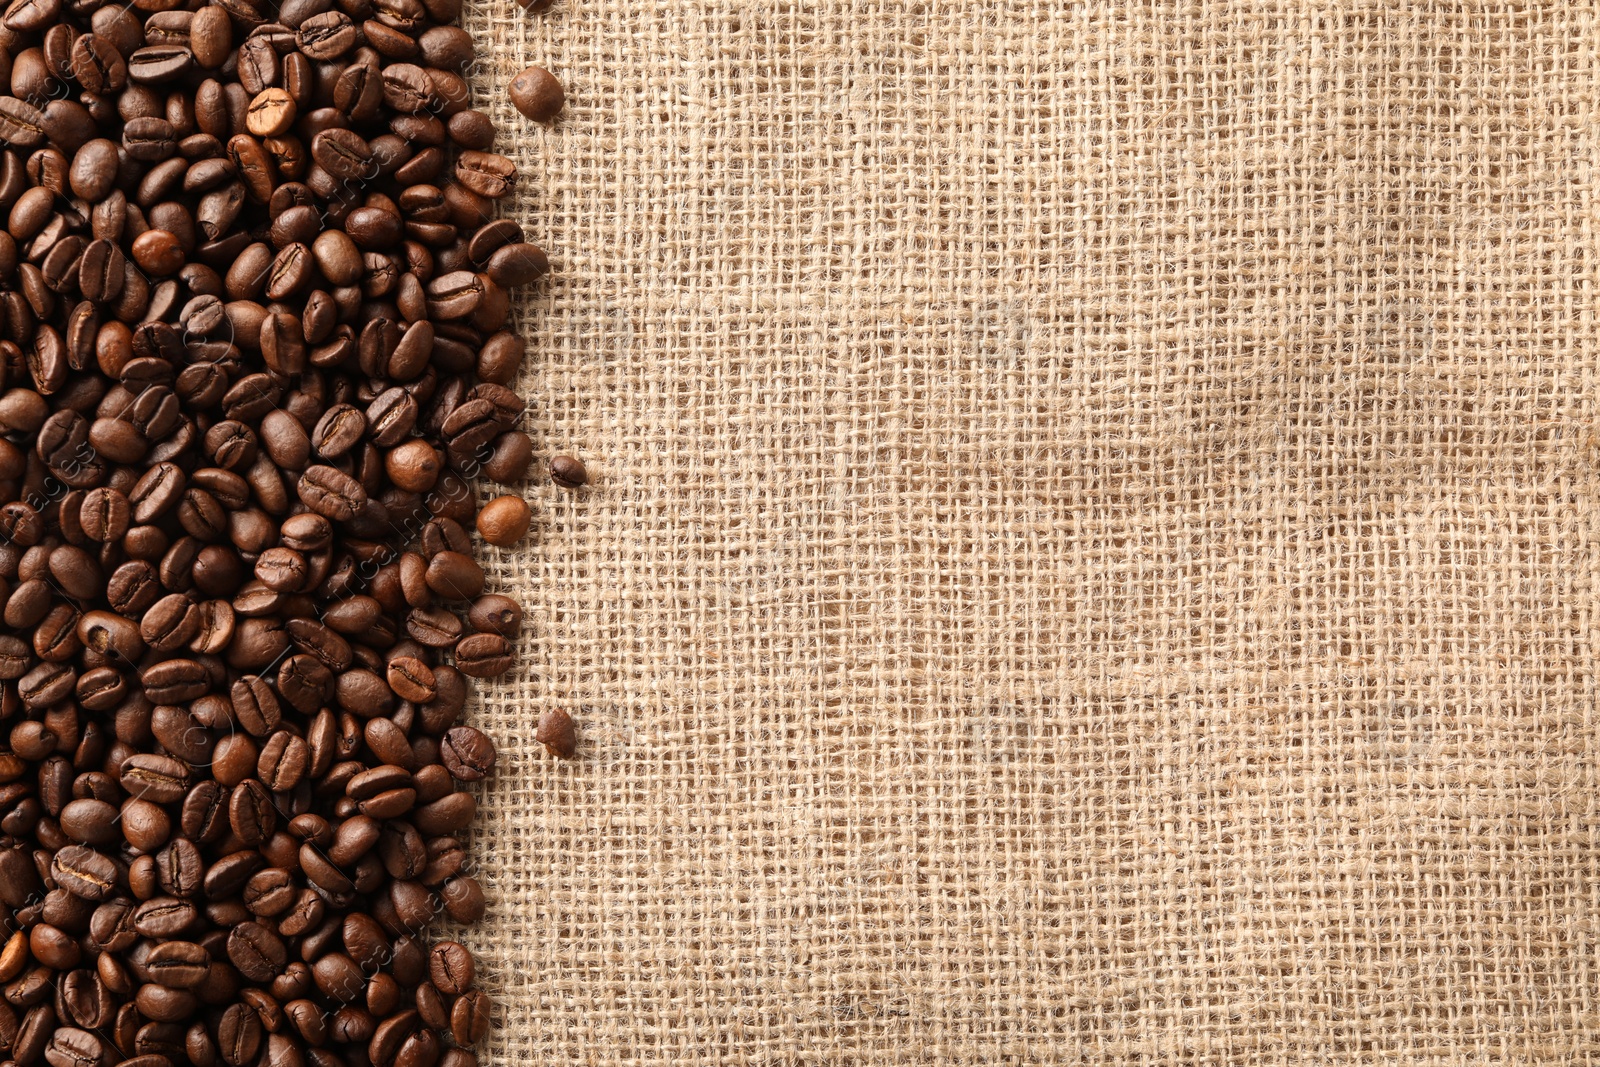 Photo of Many coffee beans on burlap fabric, top view. Space for text